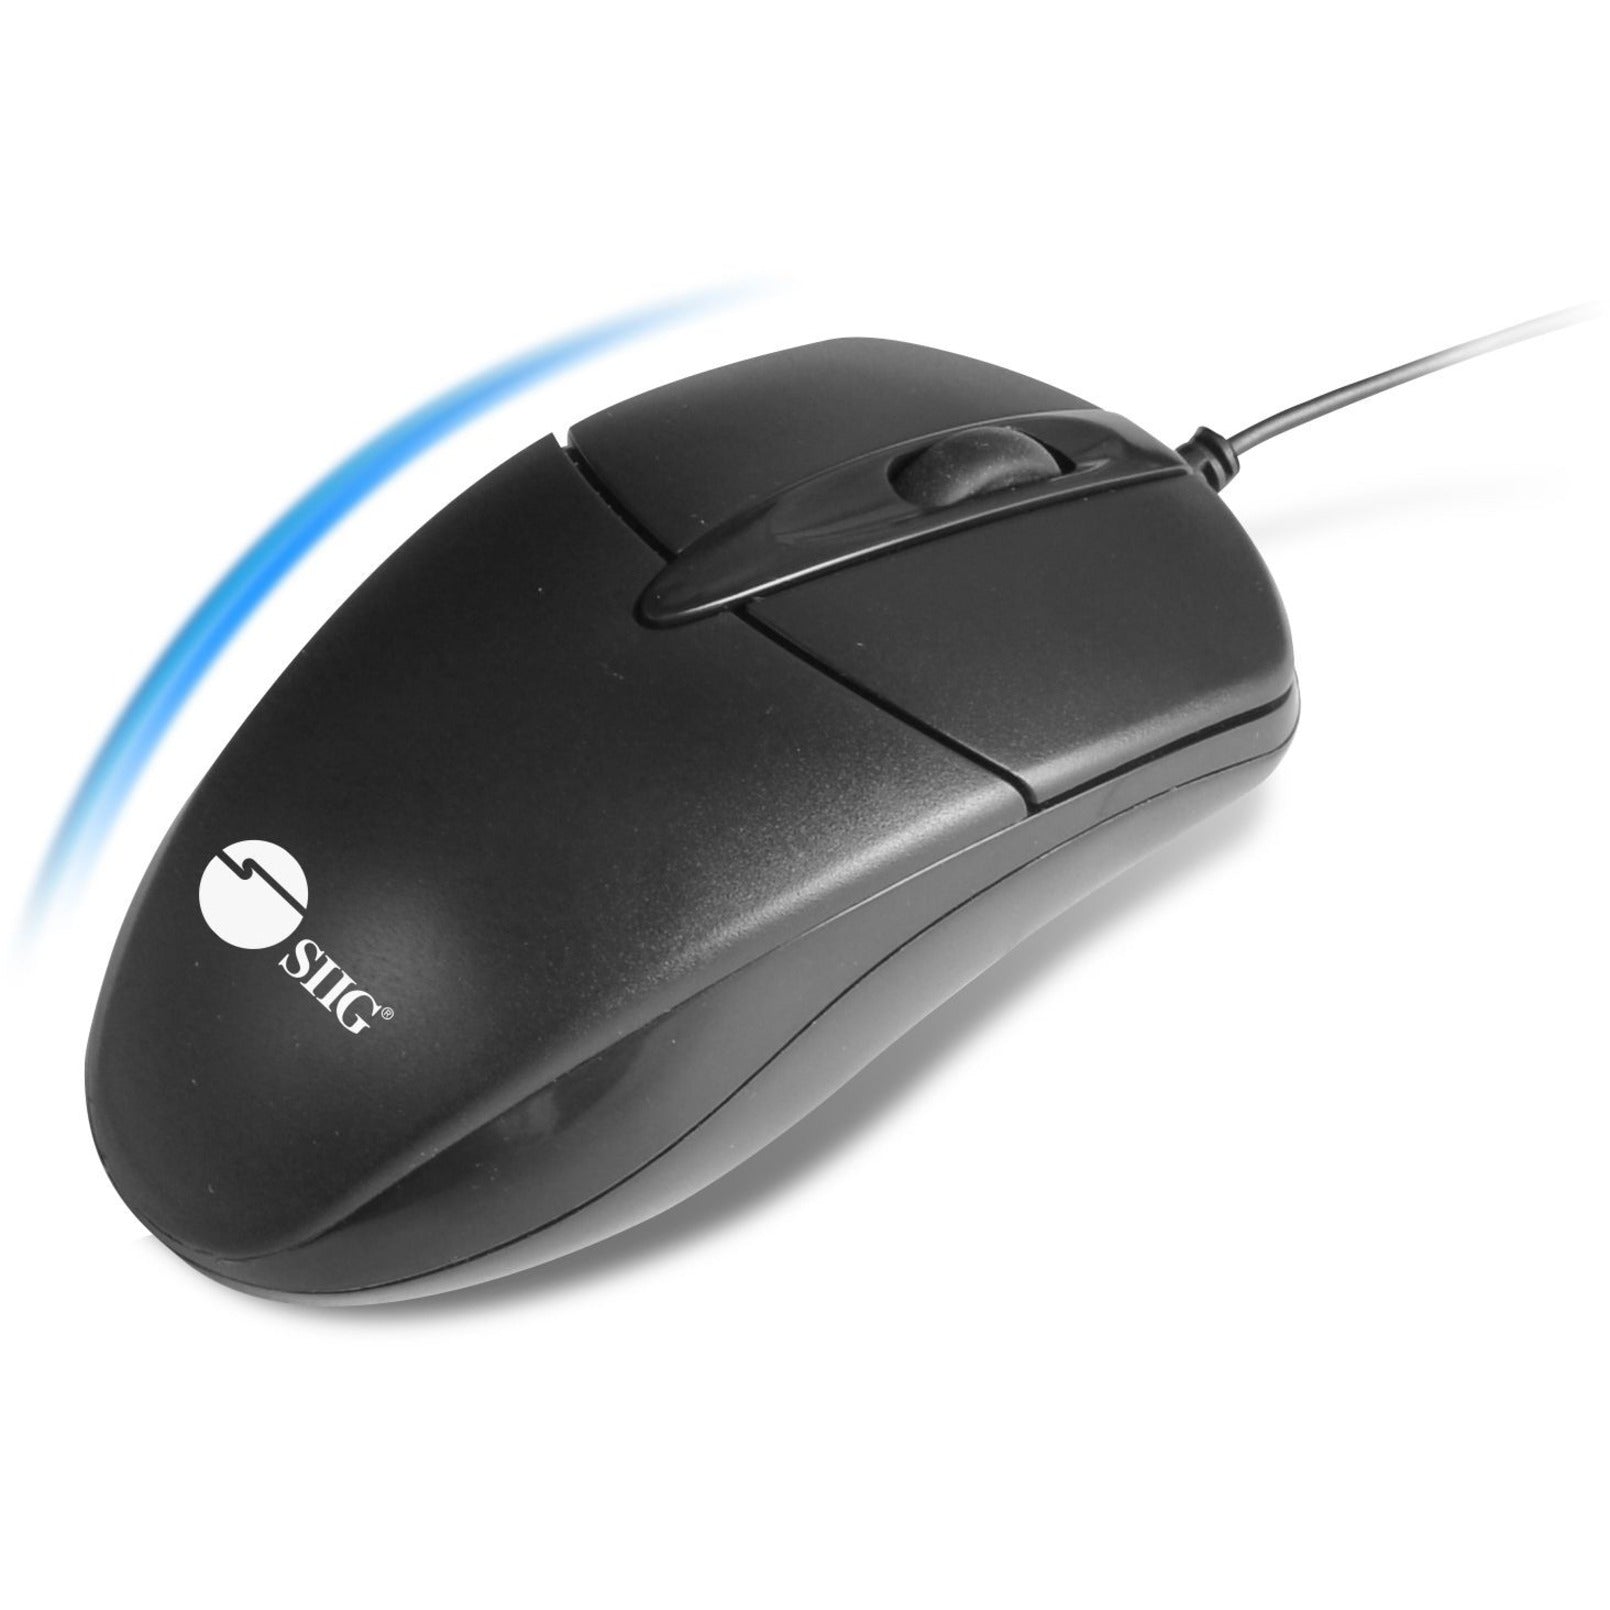 SIIG JK-US0T11-S1 3 Buttons USB Optical Mouse, Ergonomic Fit, 1200 dpi, Scroll Wheel